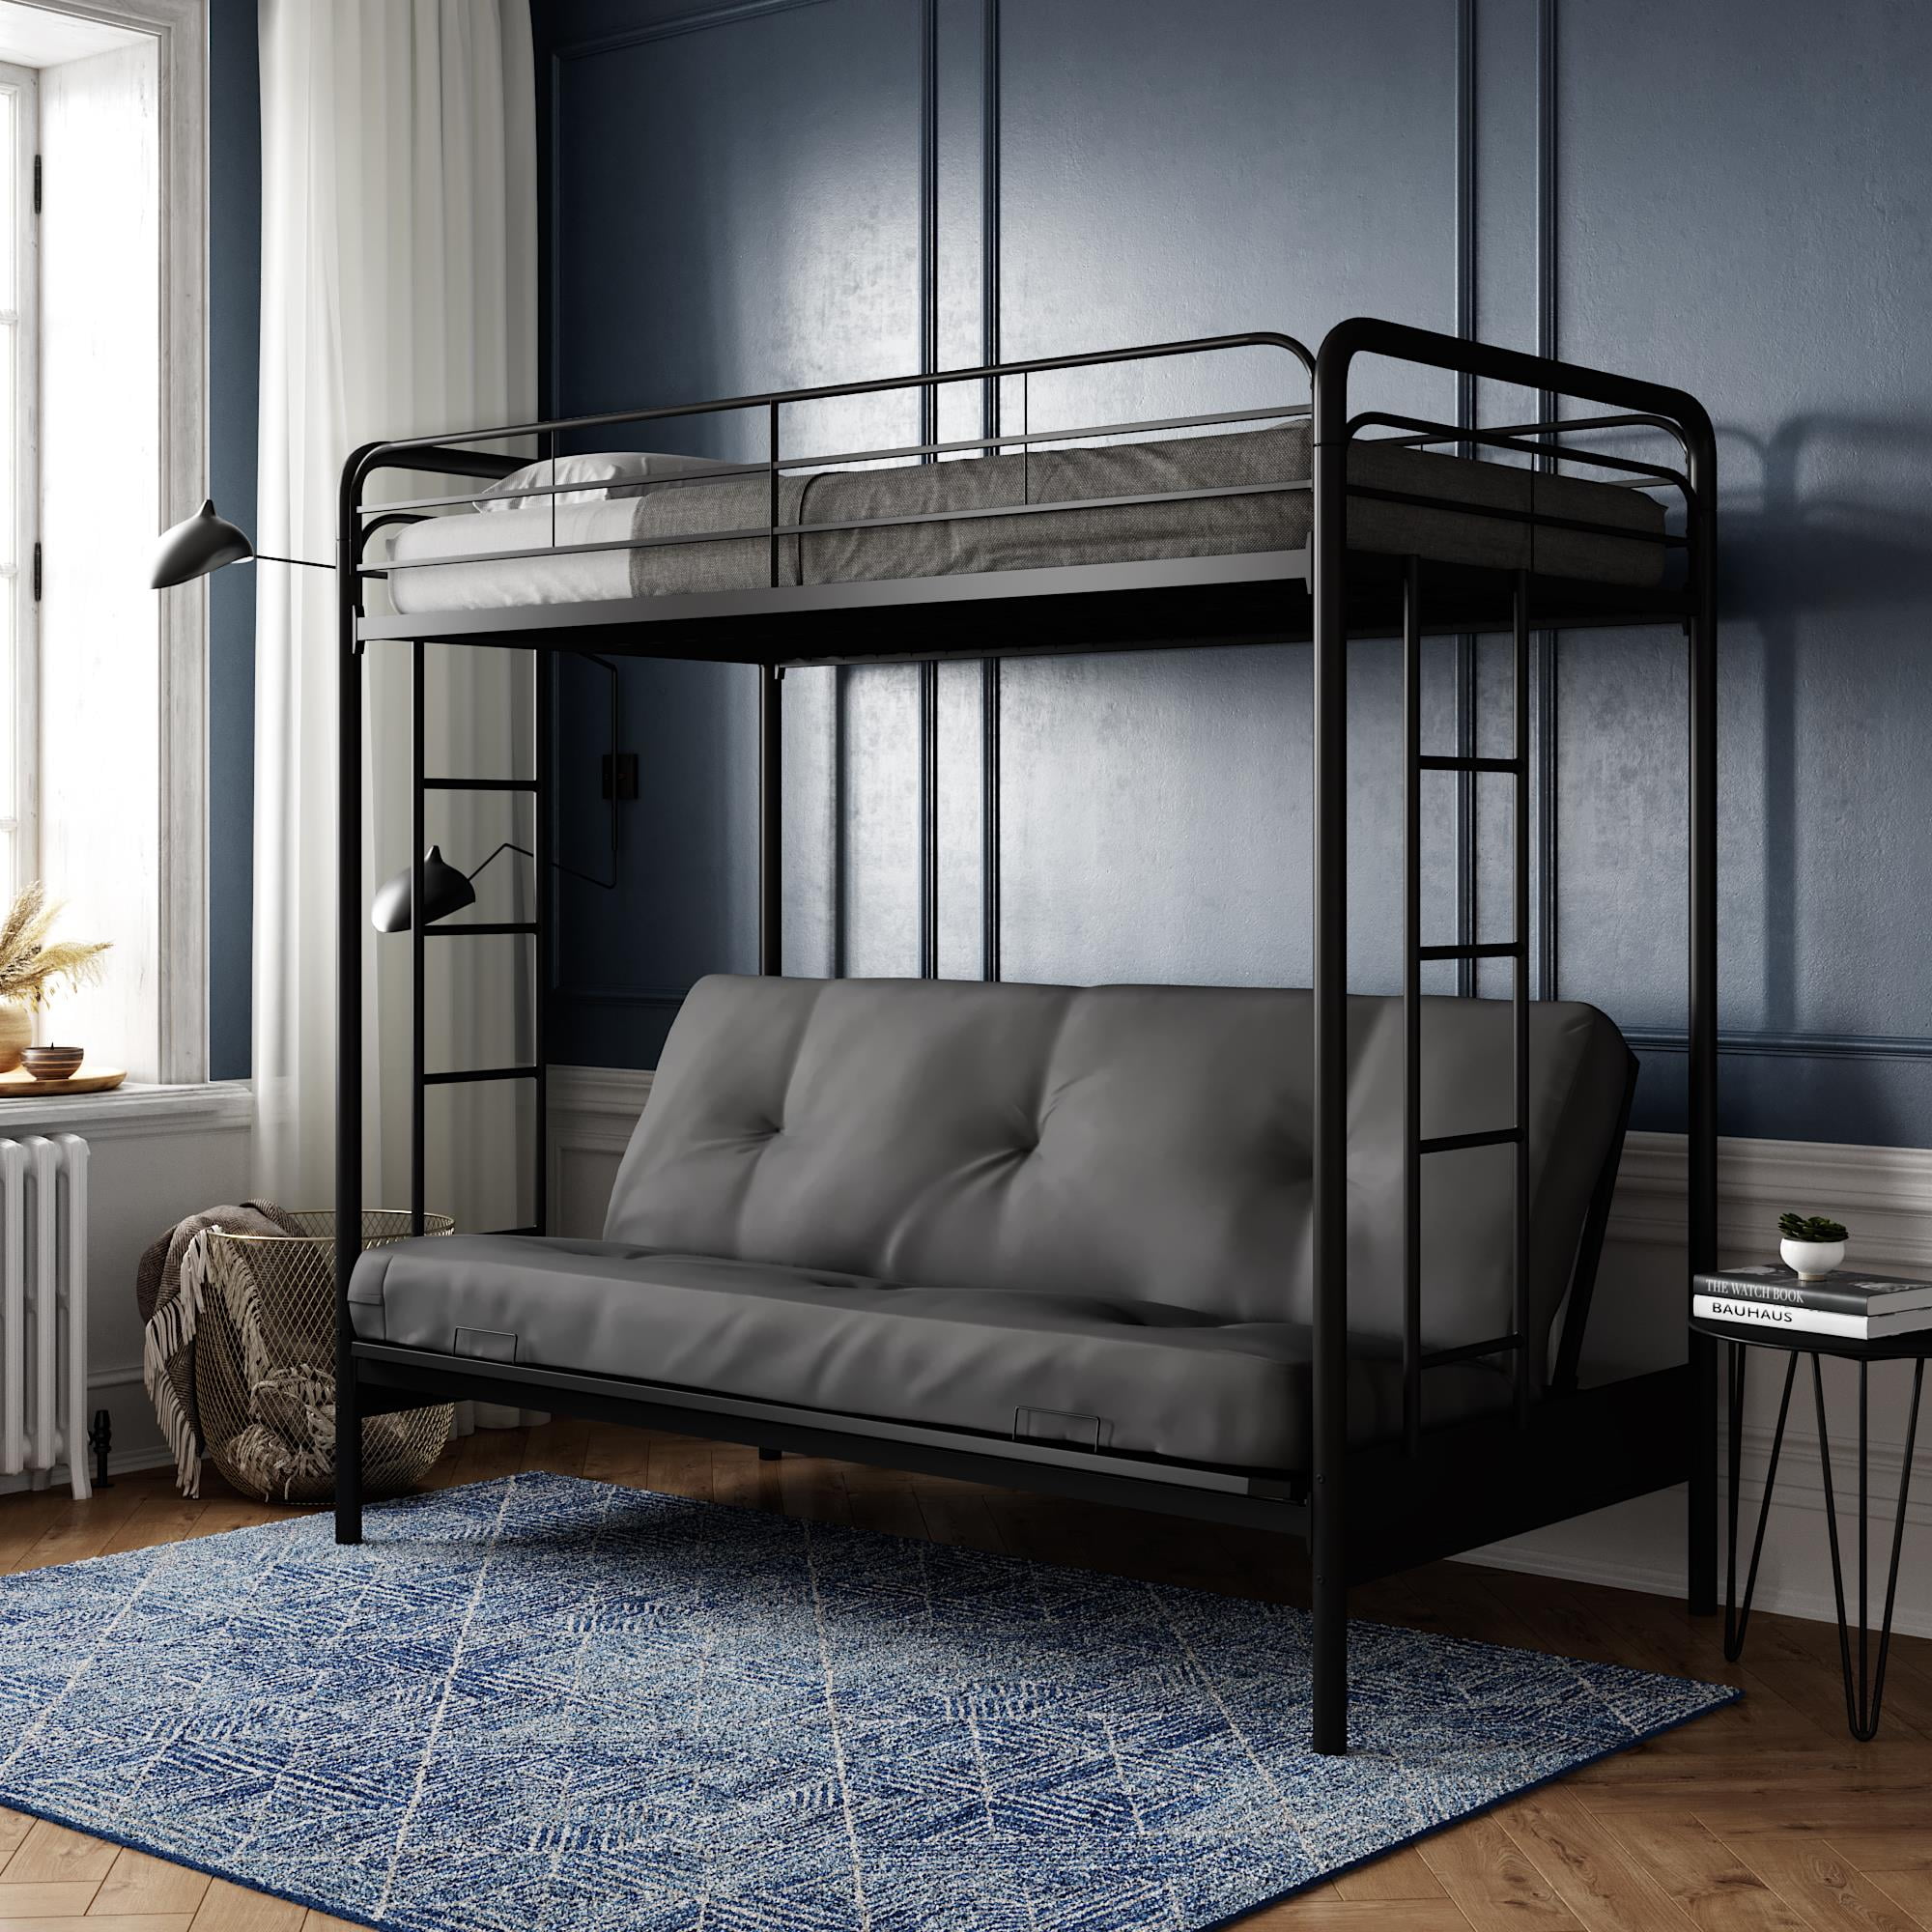 Dhp Twin Over Futon Black Metal Bunk Bed, Bunk Bed Sofa And Desk